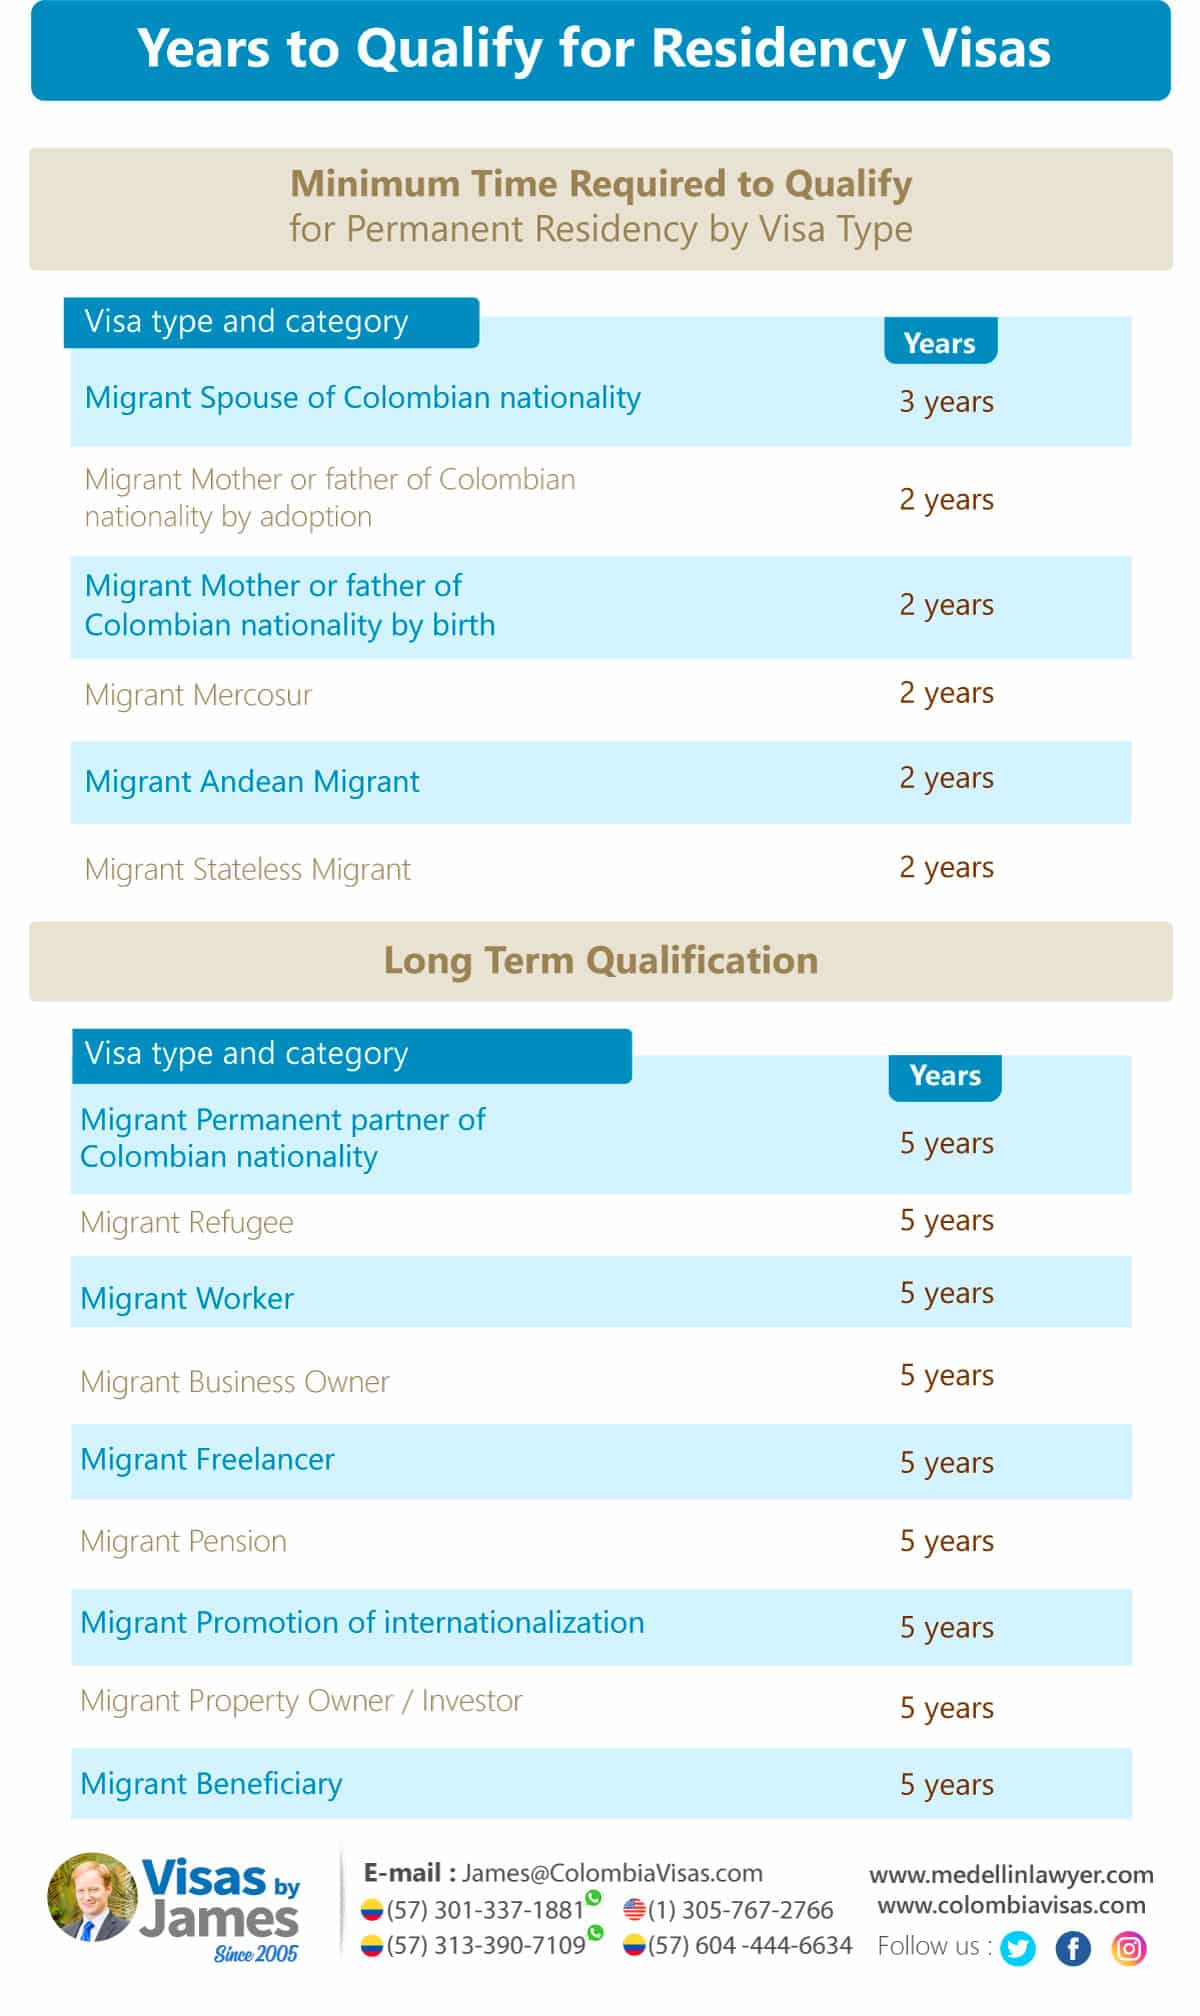 Years to Qualify for Residency Visas